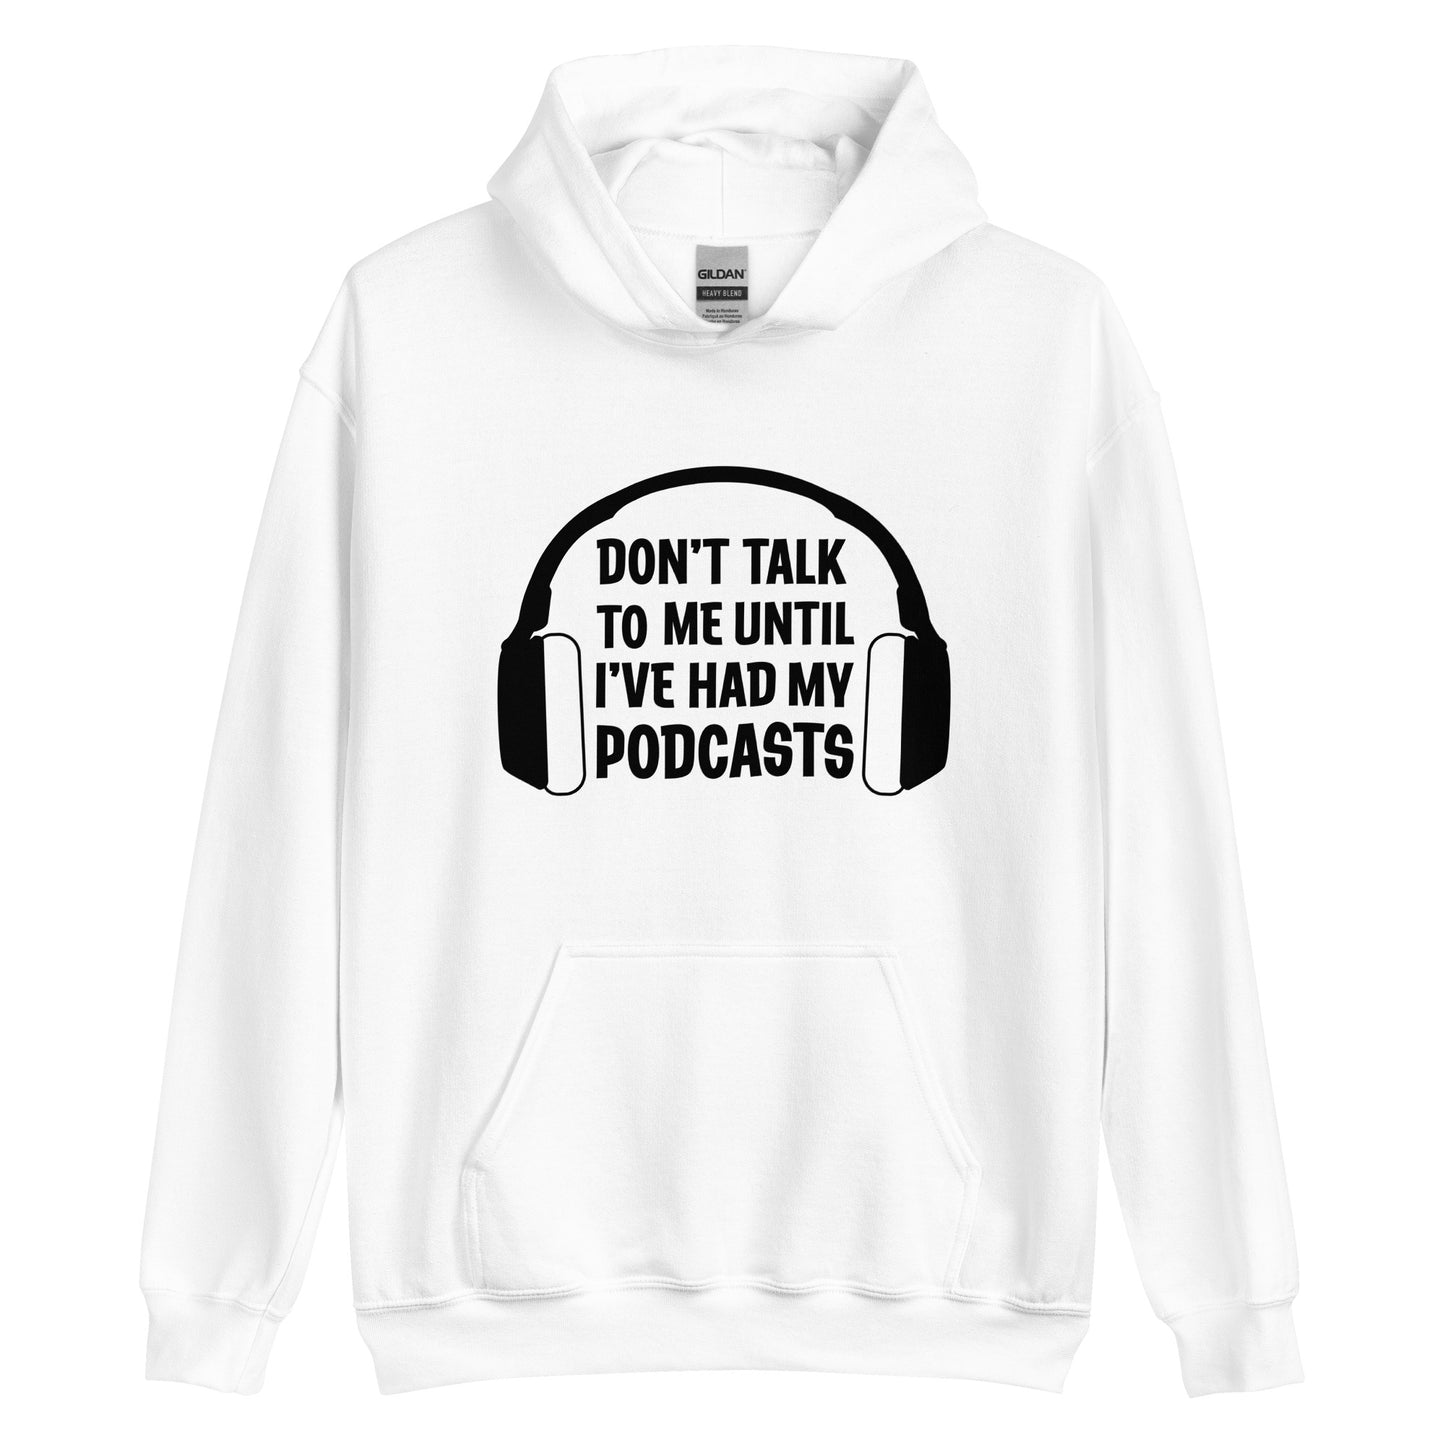 A white hooded sweatshirt with a picture of headphones and text reading "Don't talk to me until I've had my podcasts"